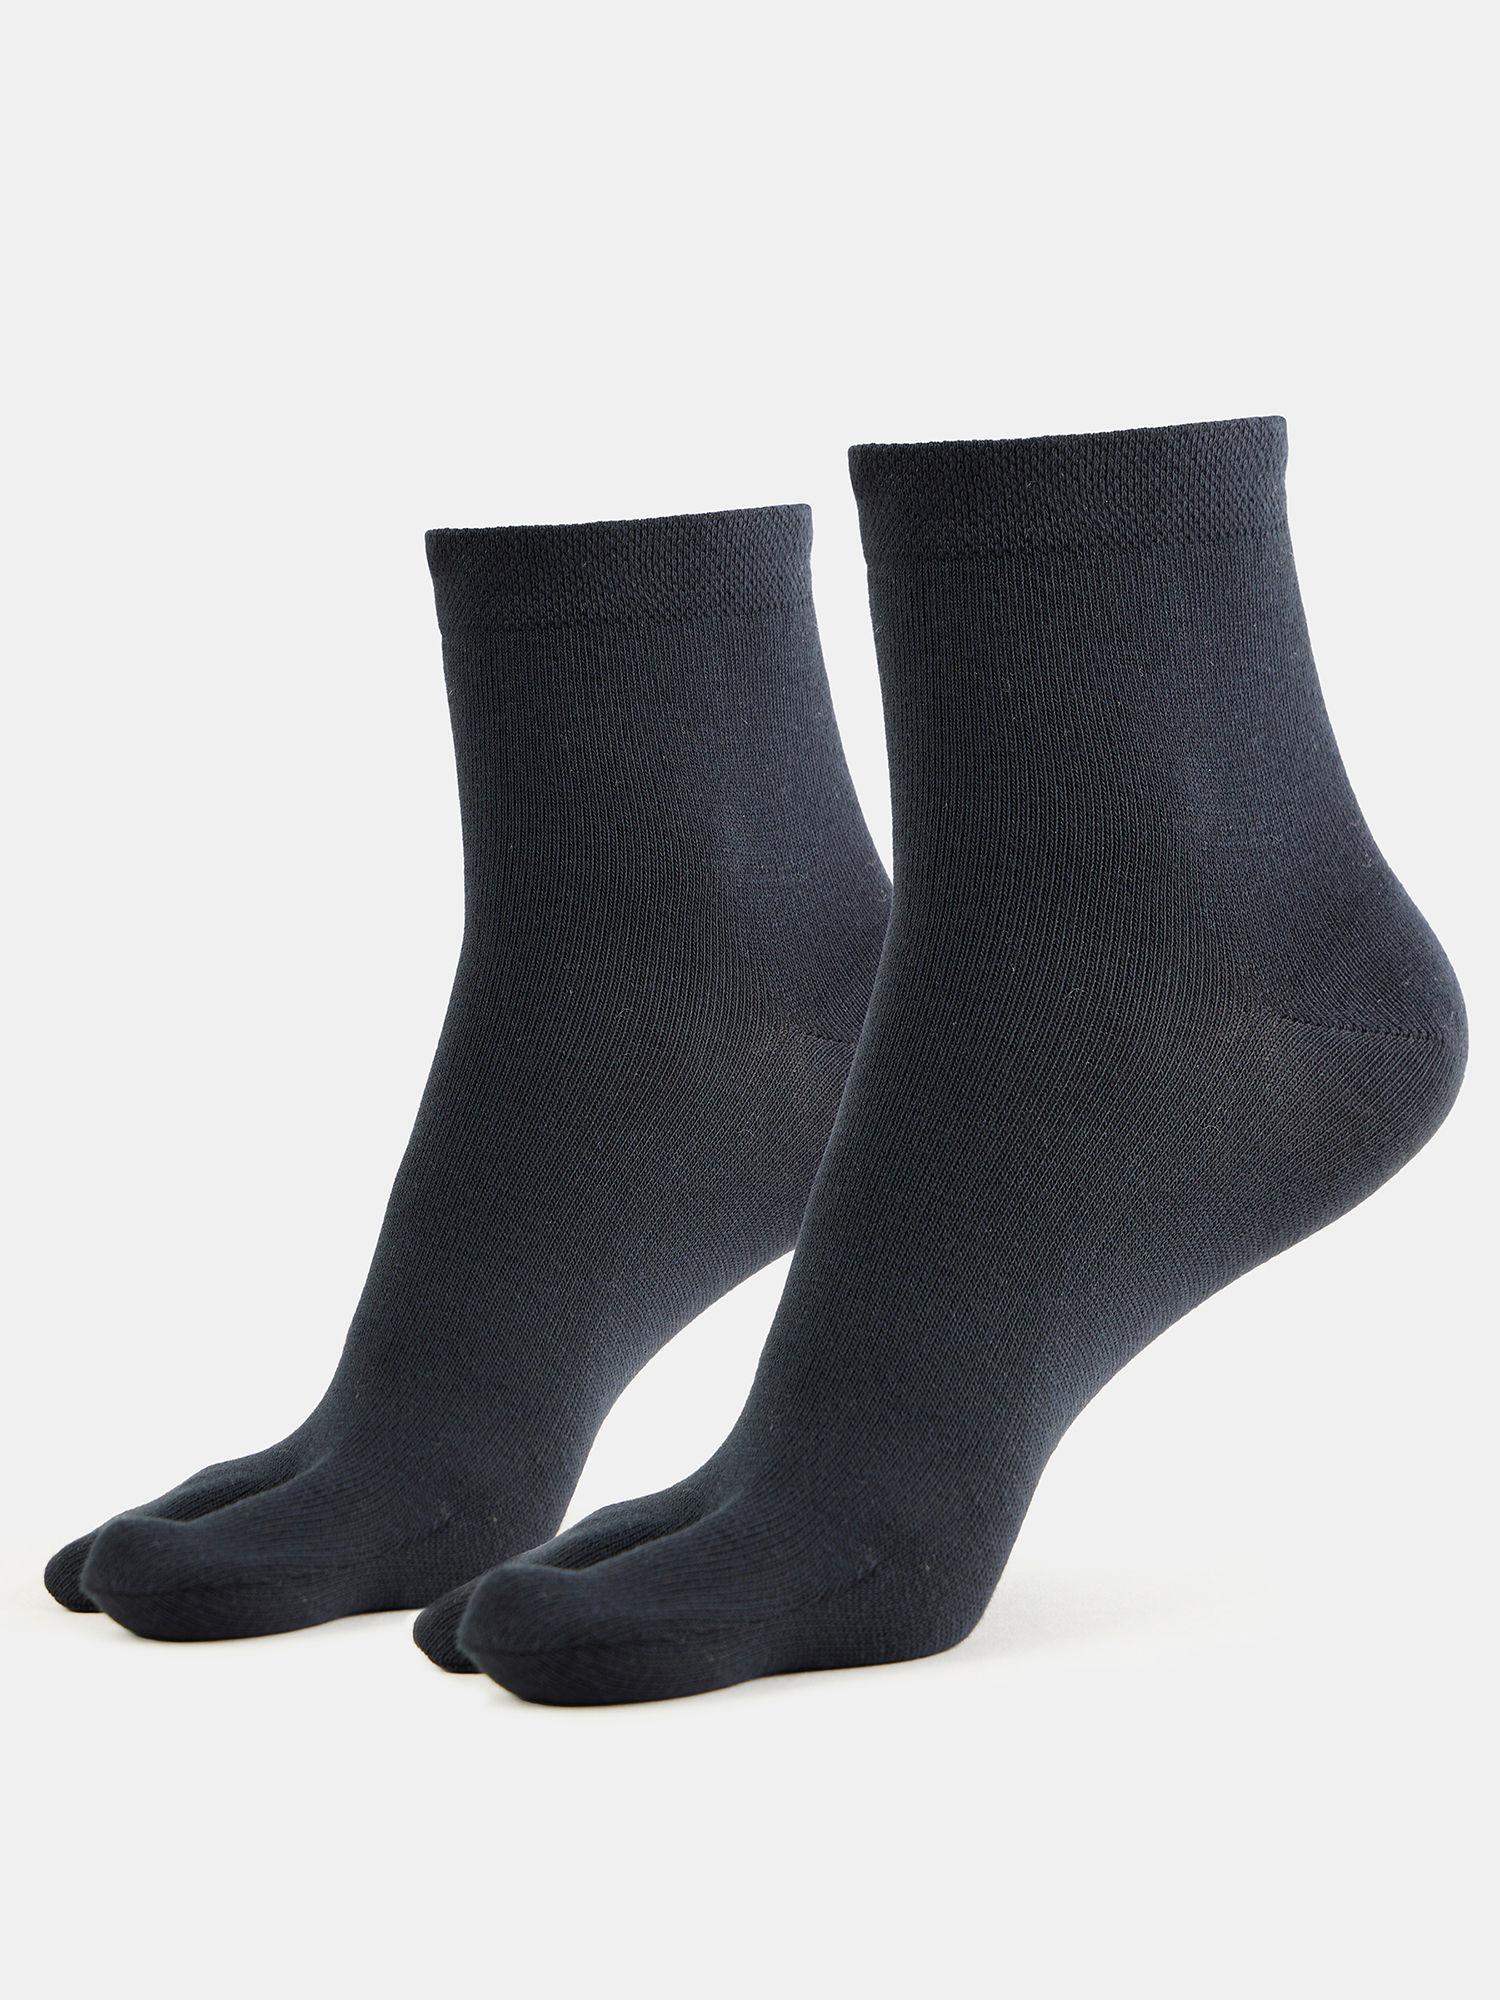 7487 womens compact cotton stretch toe socks - black (pack of 2)